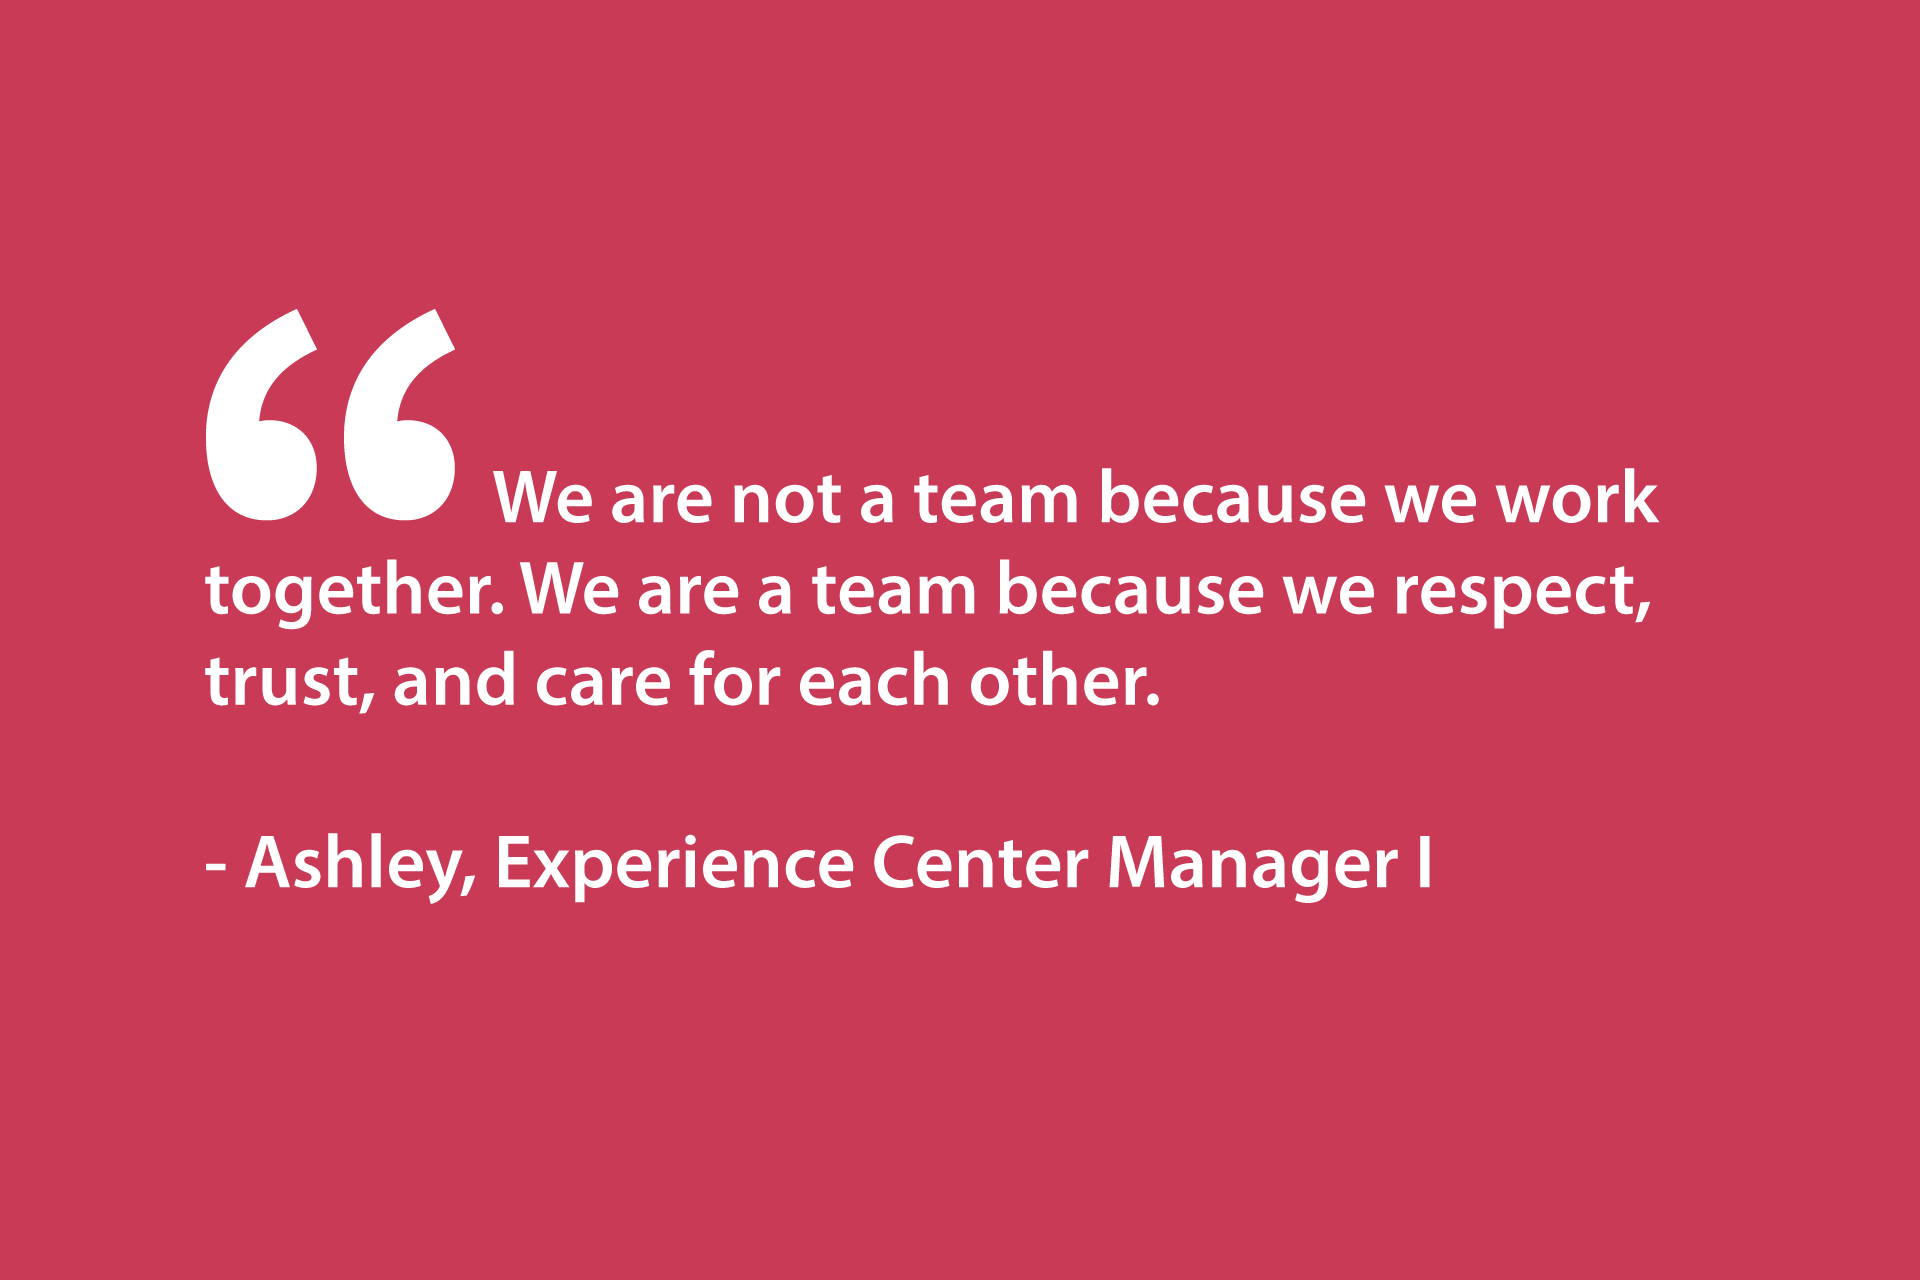 We are not a team because we work together. We are a team because we respect, trust, and care for each other. - Ashley, Experience Center Manager I